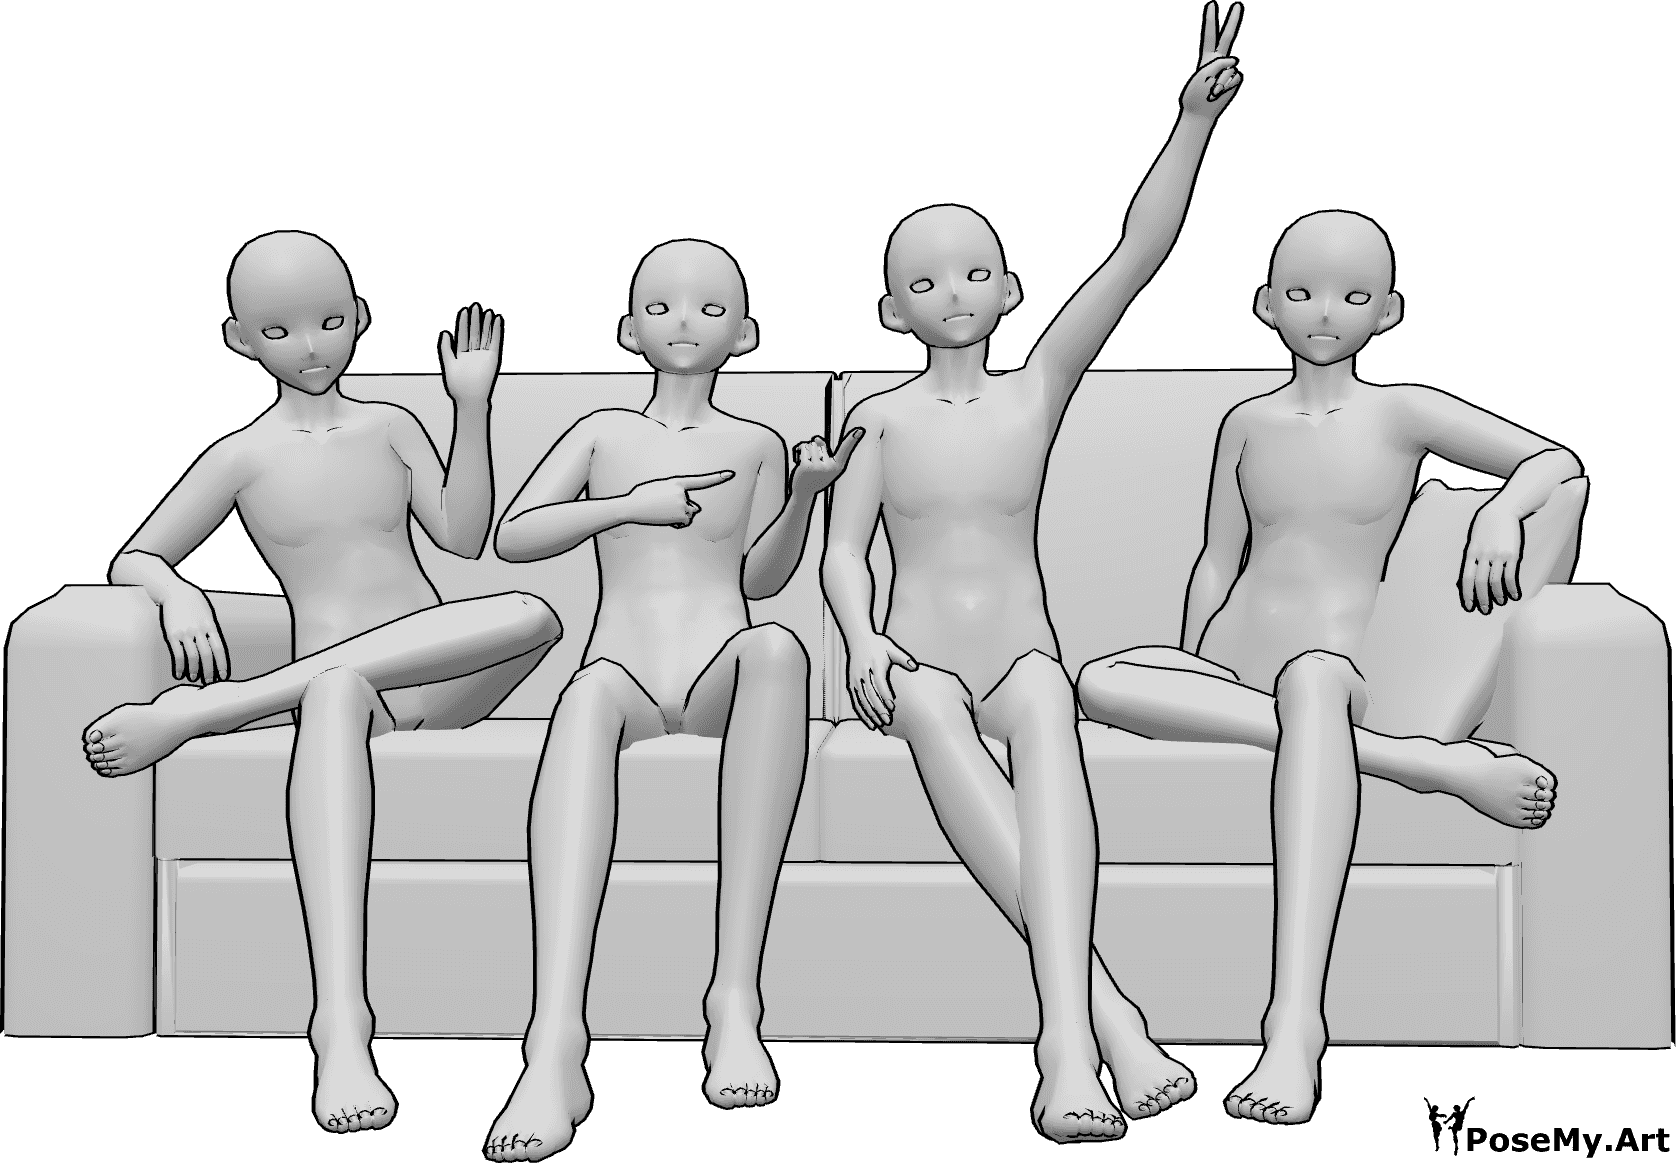 Pose Reference- Anime male friends group pose - Group of five anime males are sitting on the sofa, waving and showing peace sign